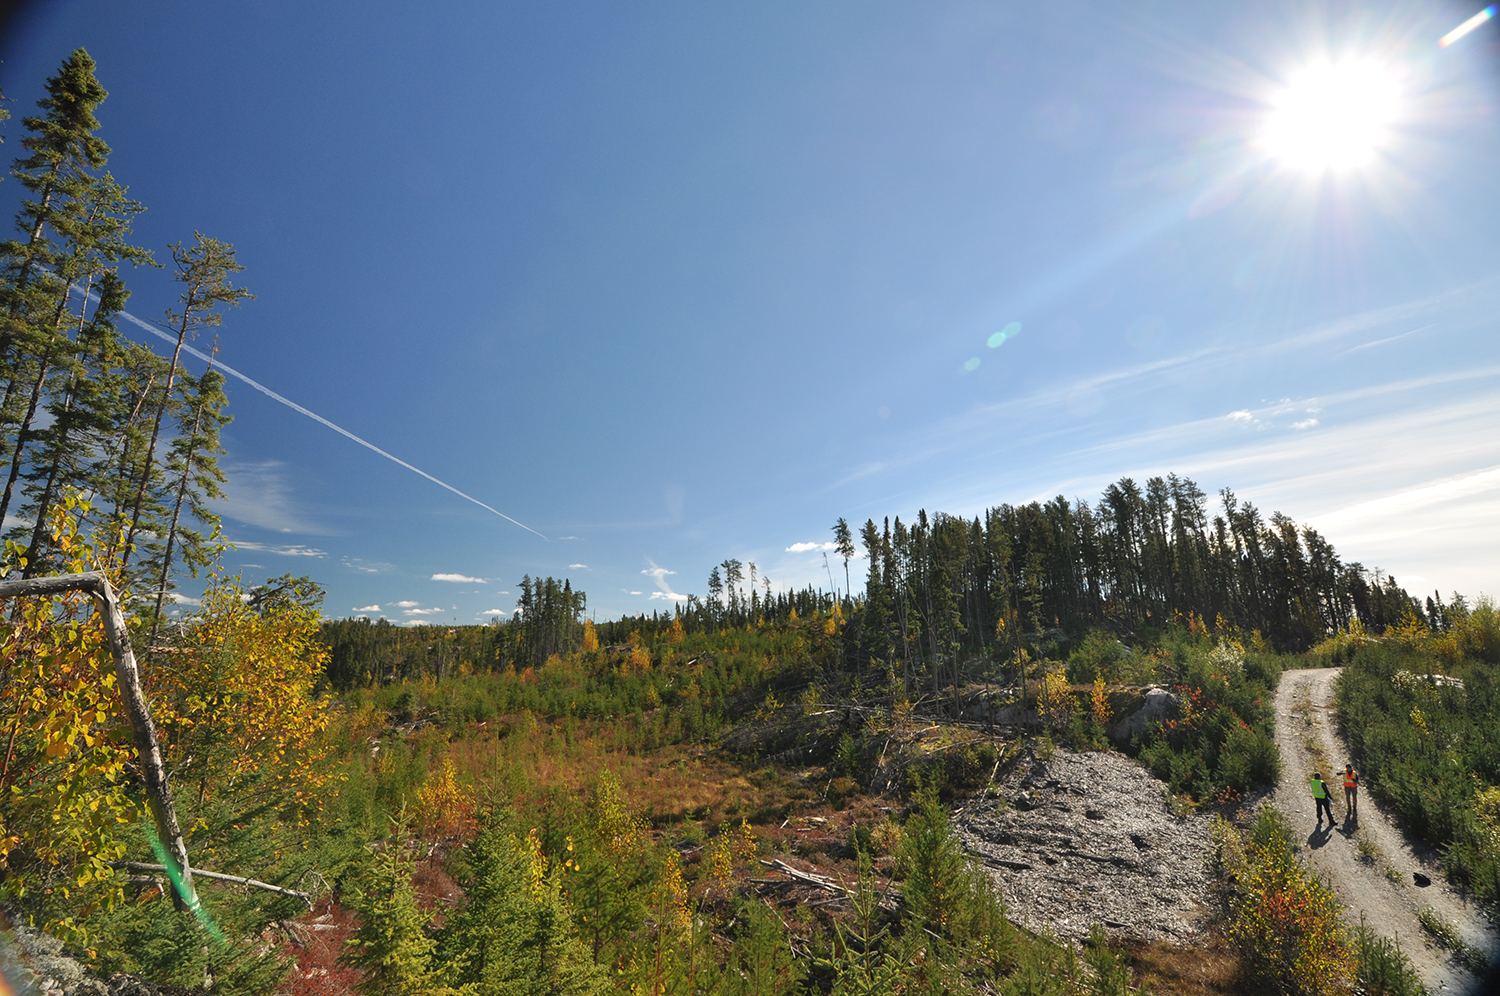 An image of an Ontario landscape.